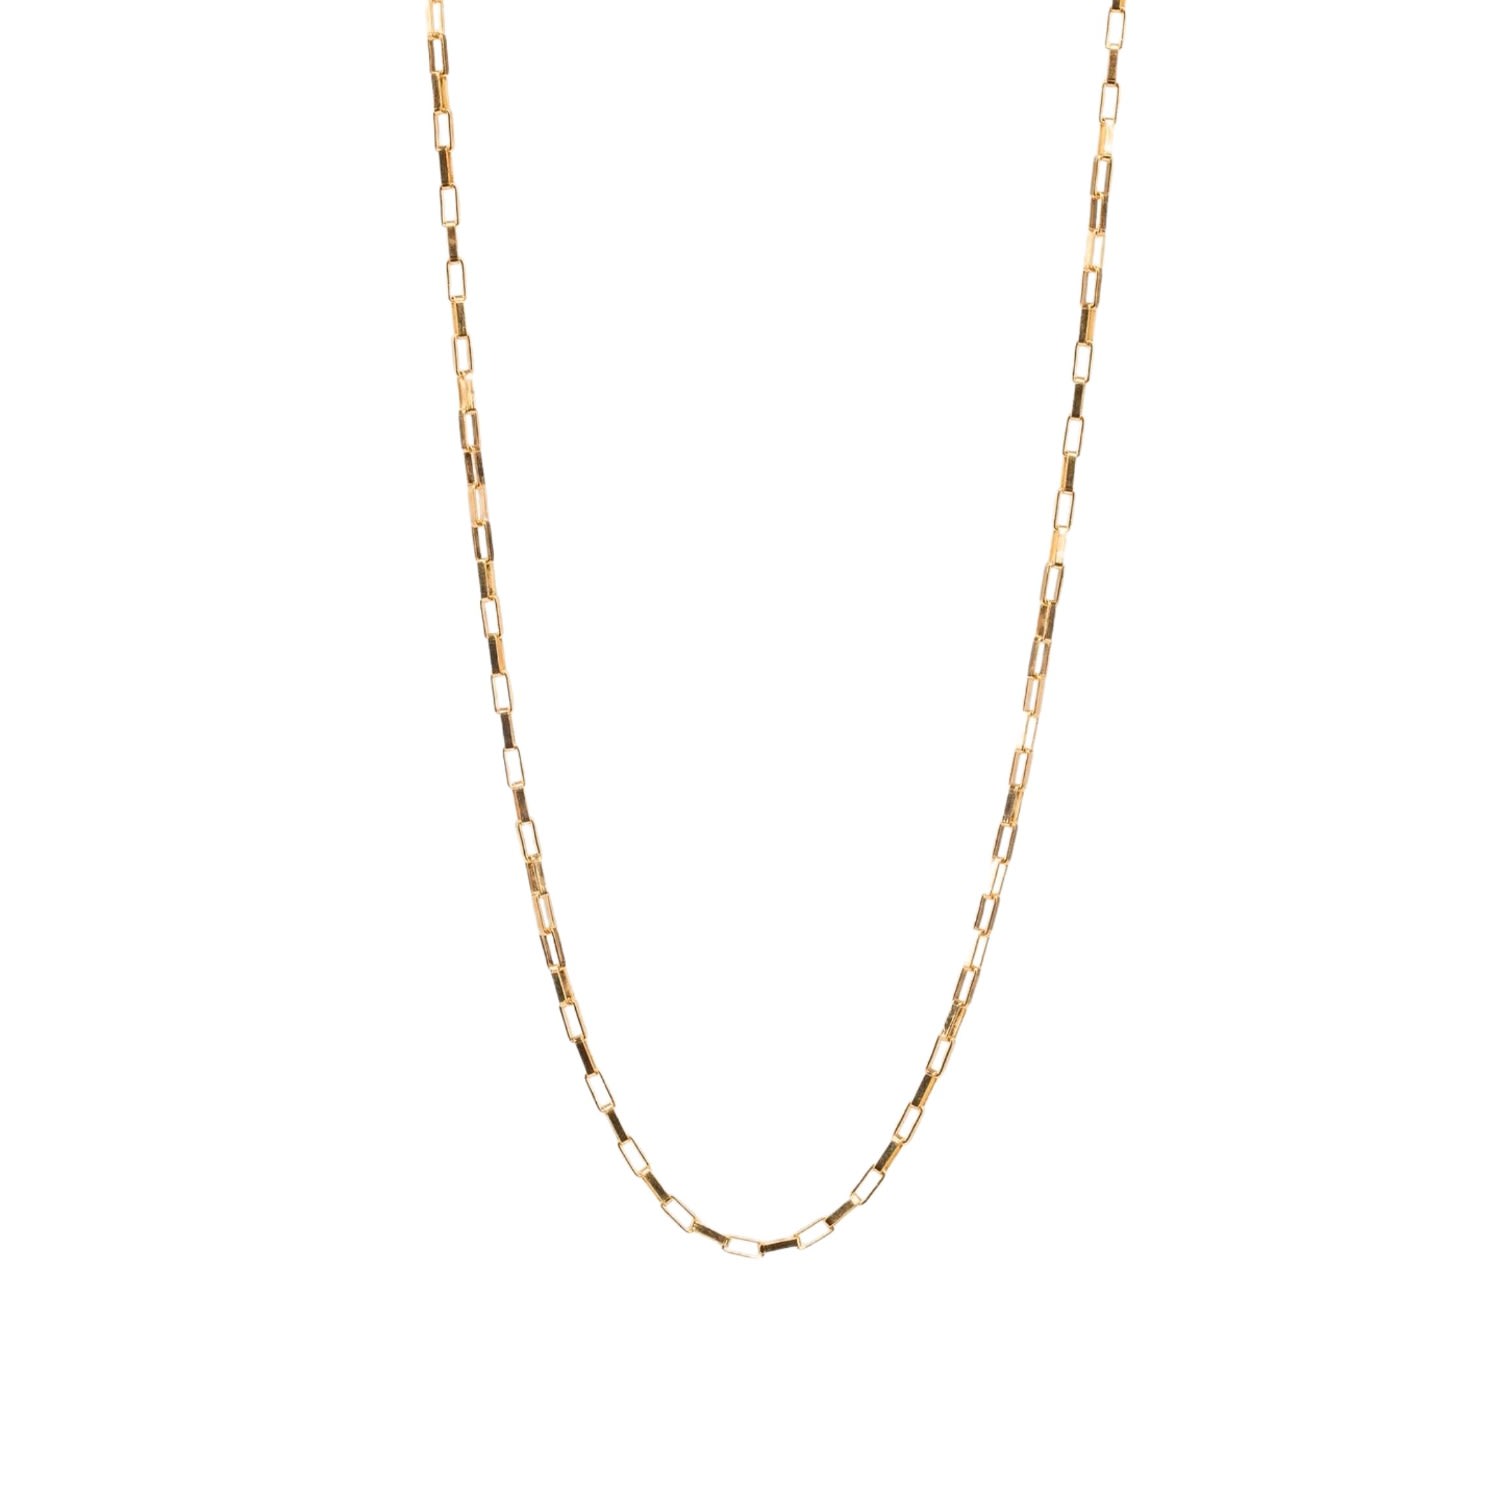 Gwen Beloti Jewelry Women's Gold Everyday Linked Necklace